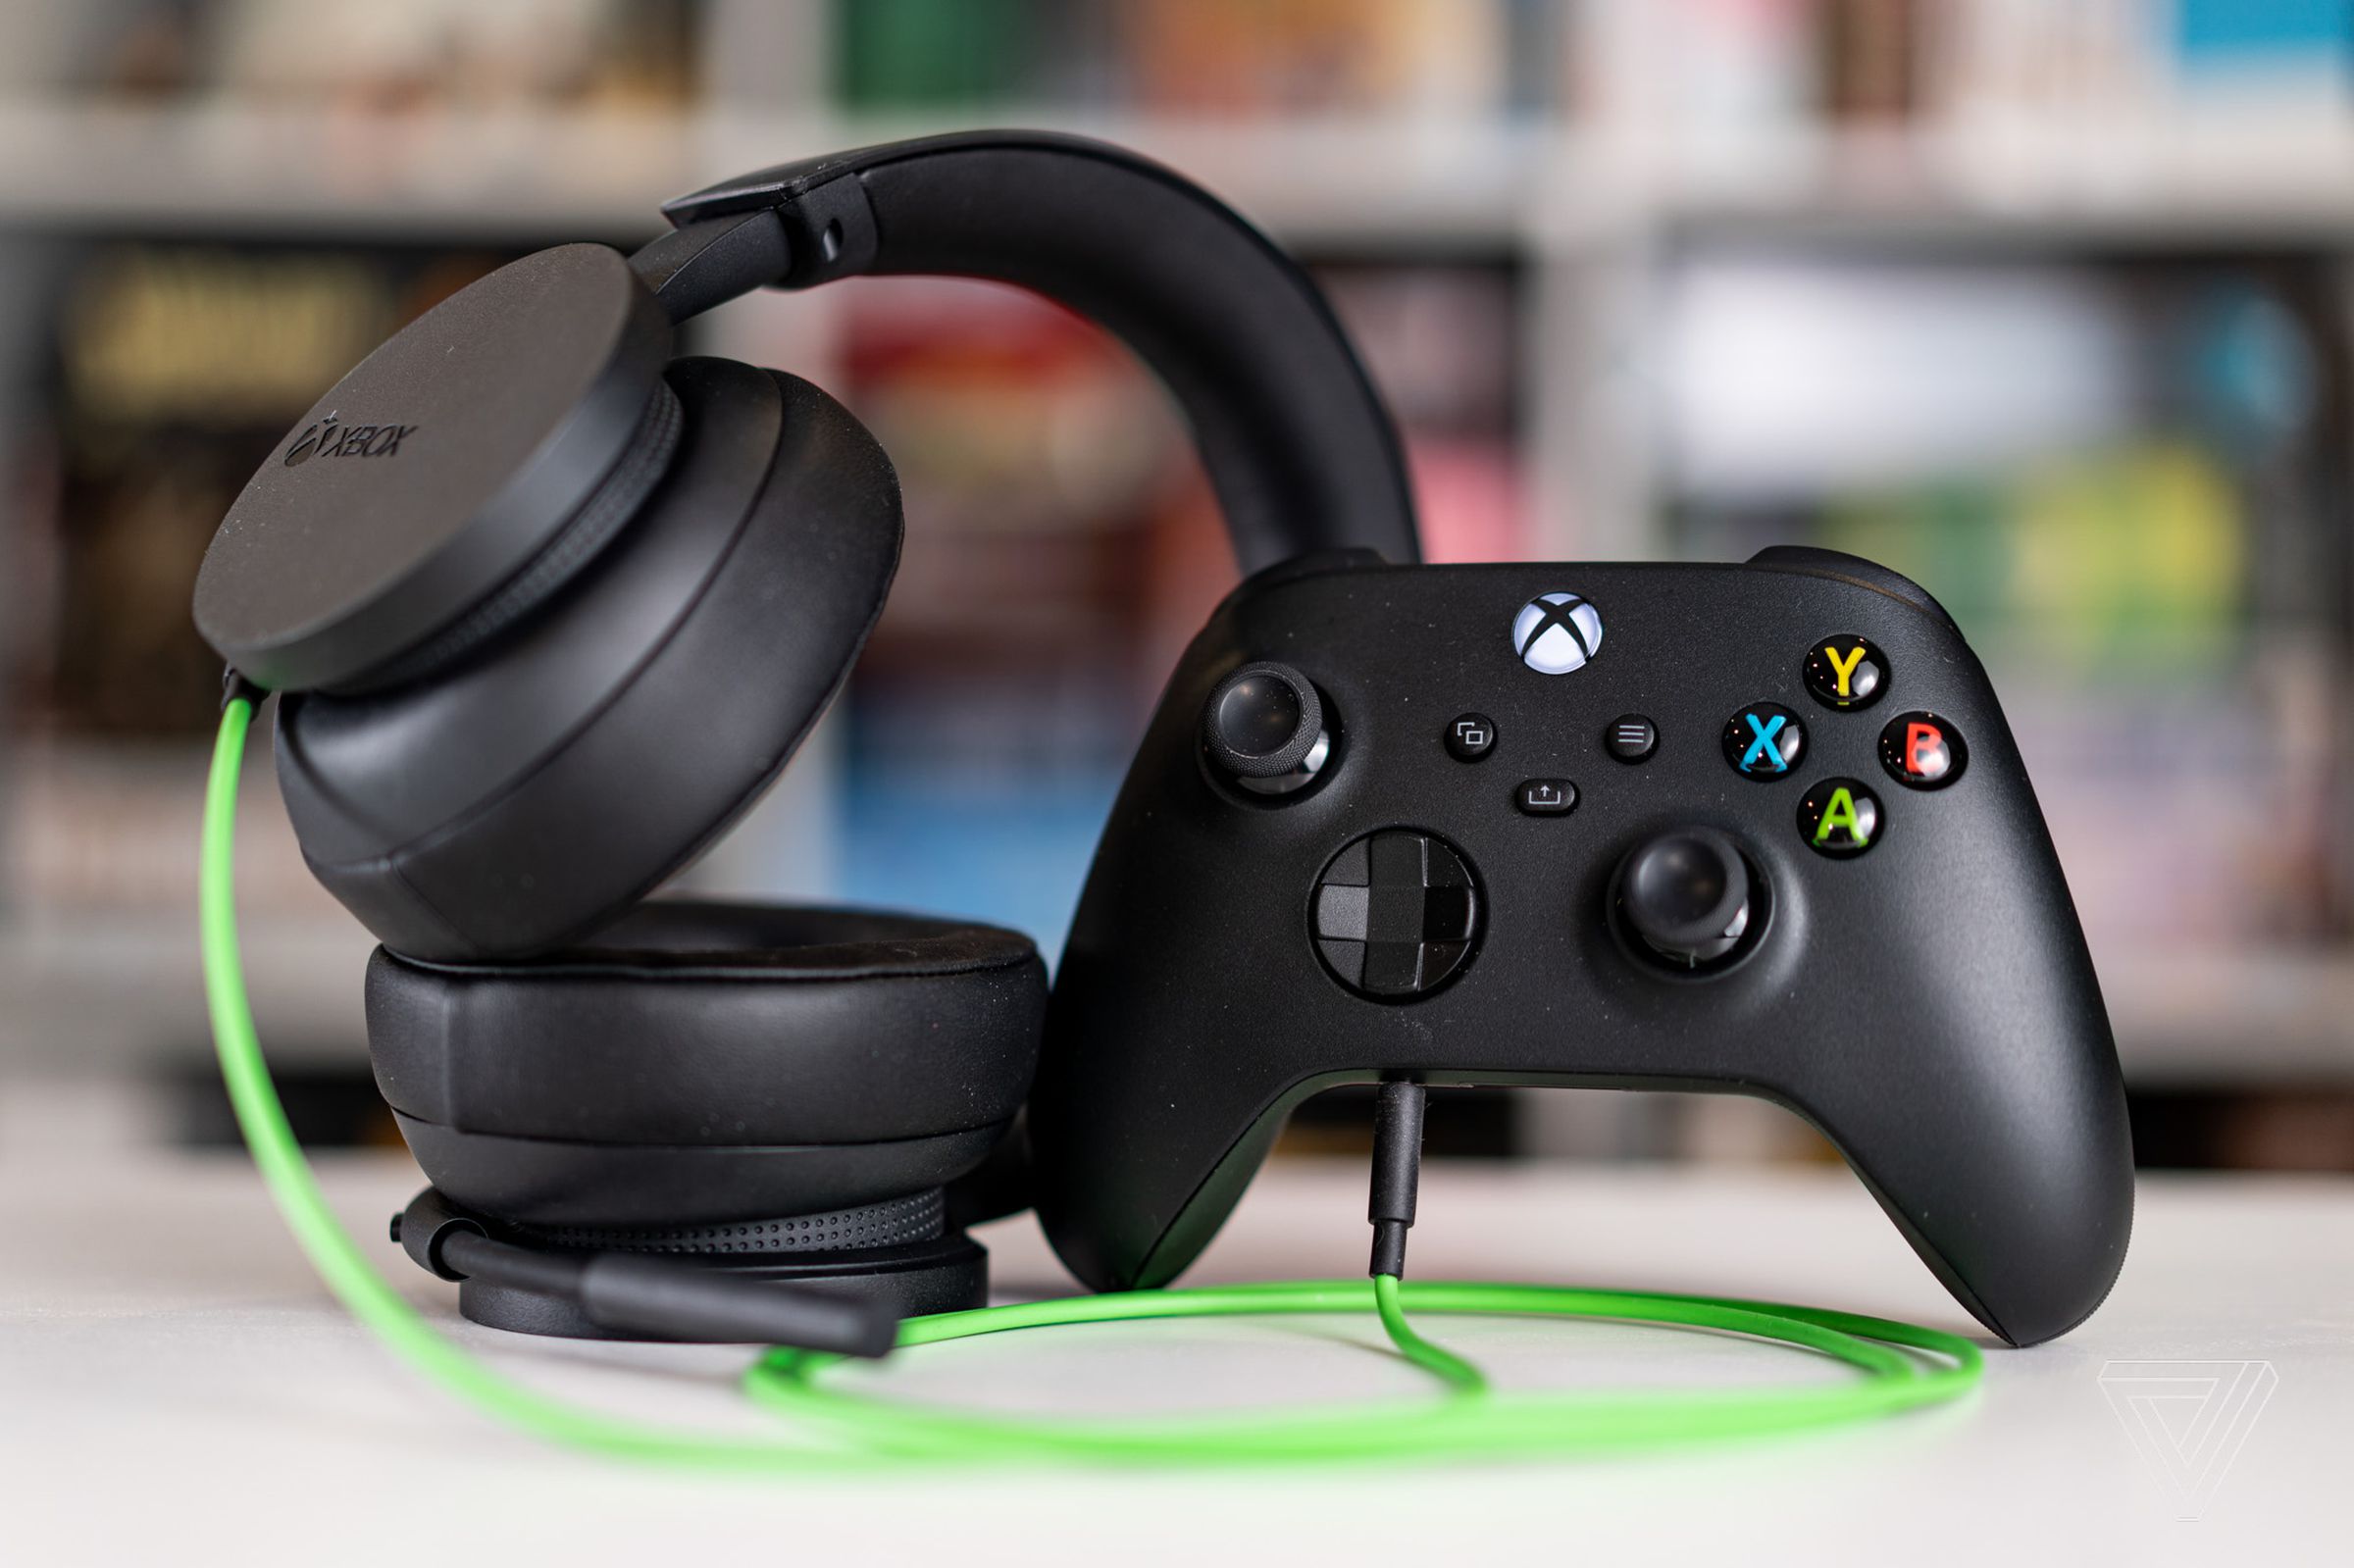 <em>The simplicity of a wired headset and controllers with a headphone jack.</em>